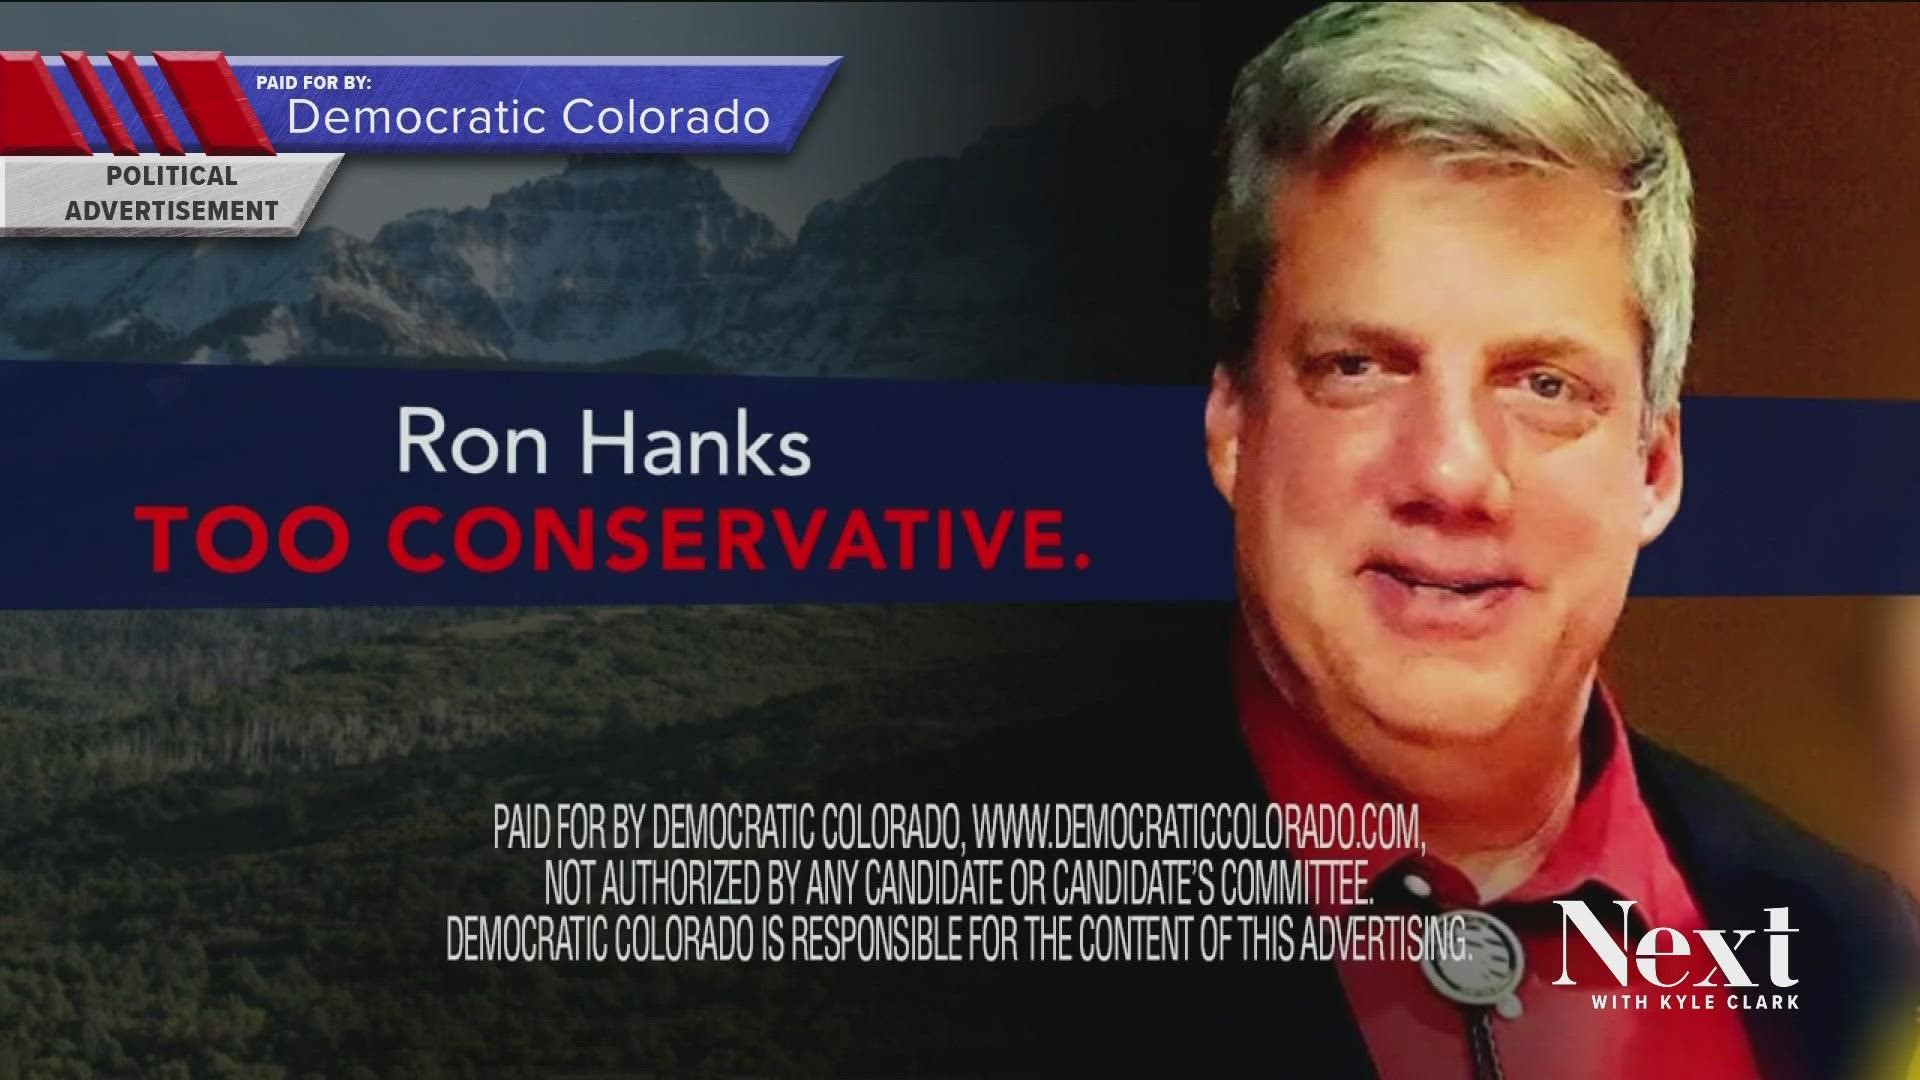 Ads that seem to attack candidates like Republican Ron Hanks, who's running for Senate, are thought to help Democrats win the November vote.